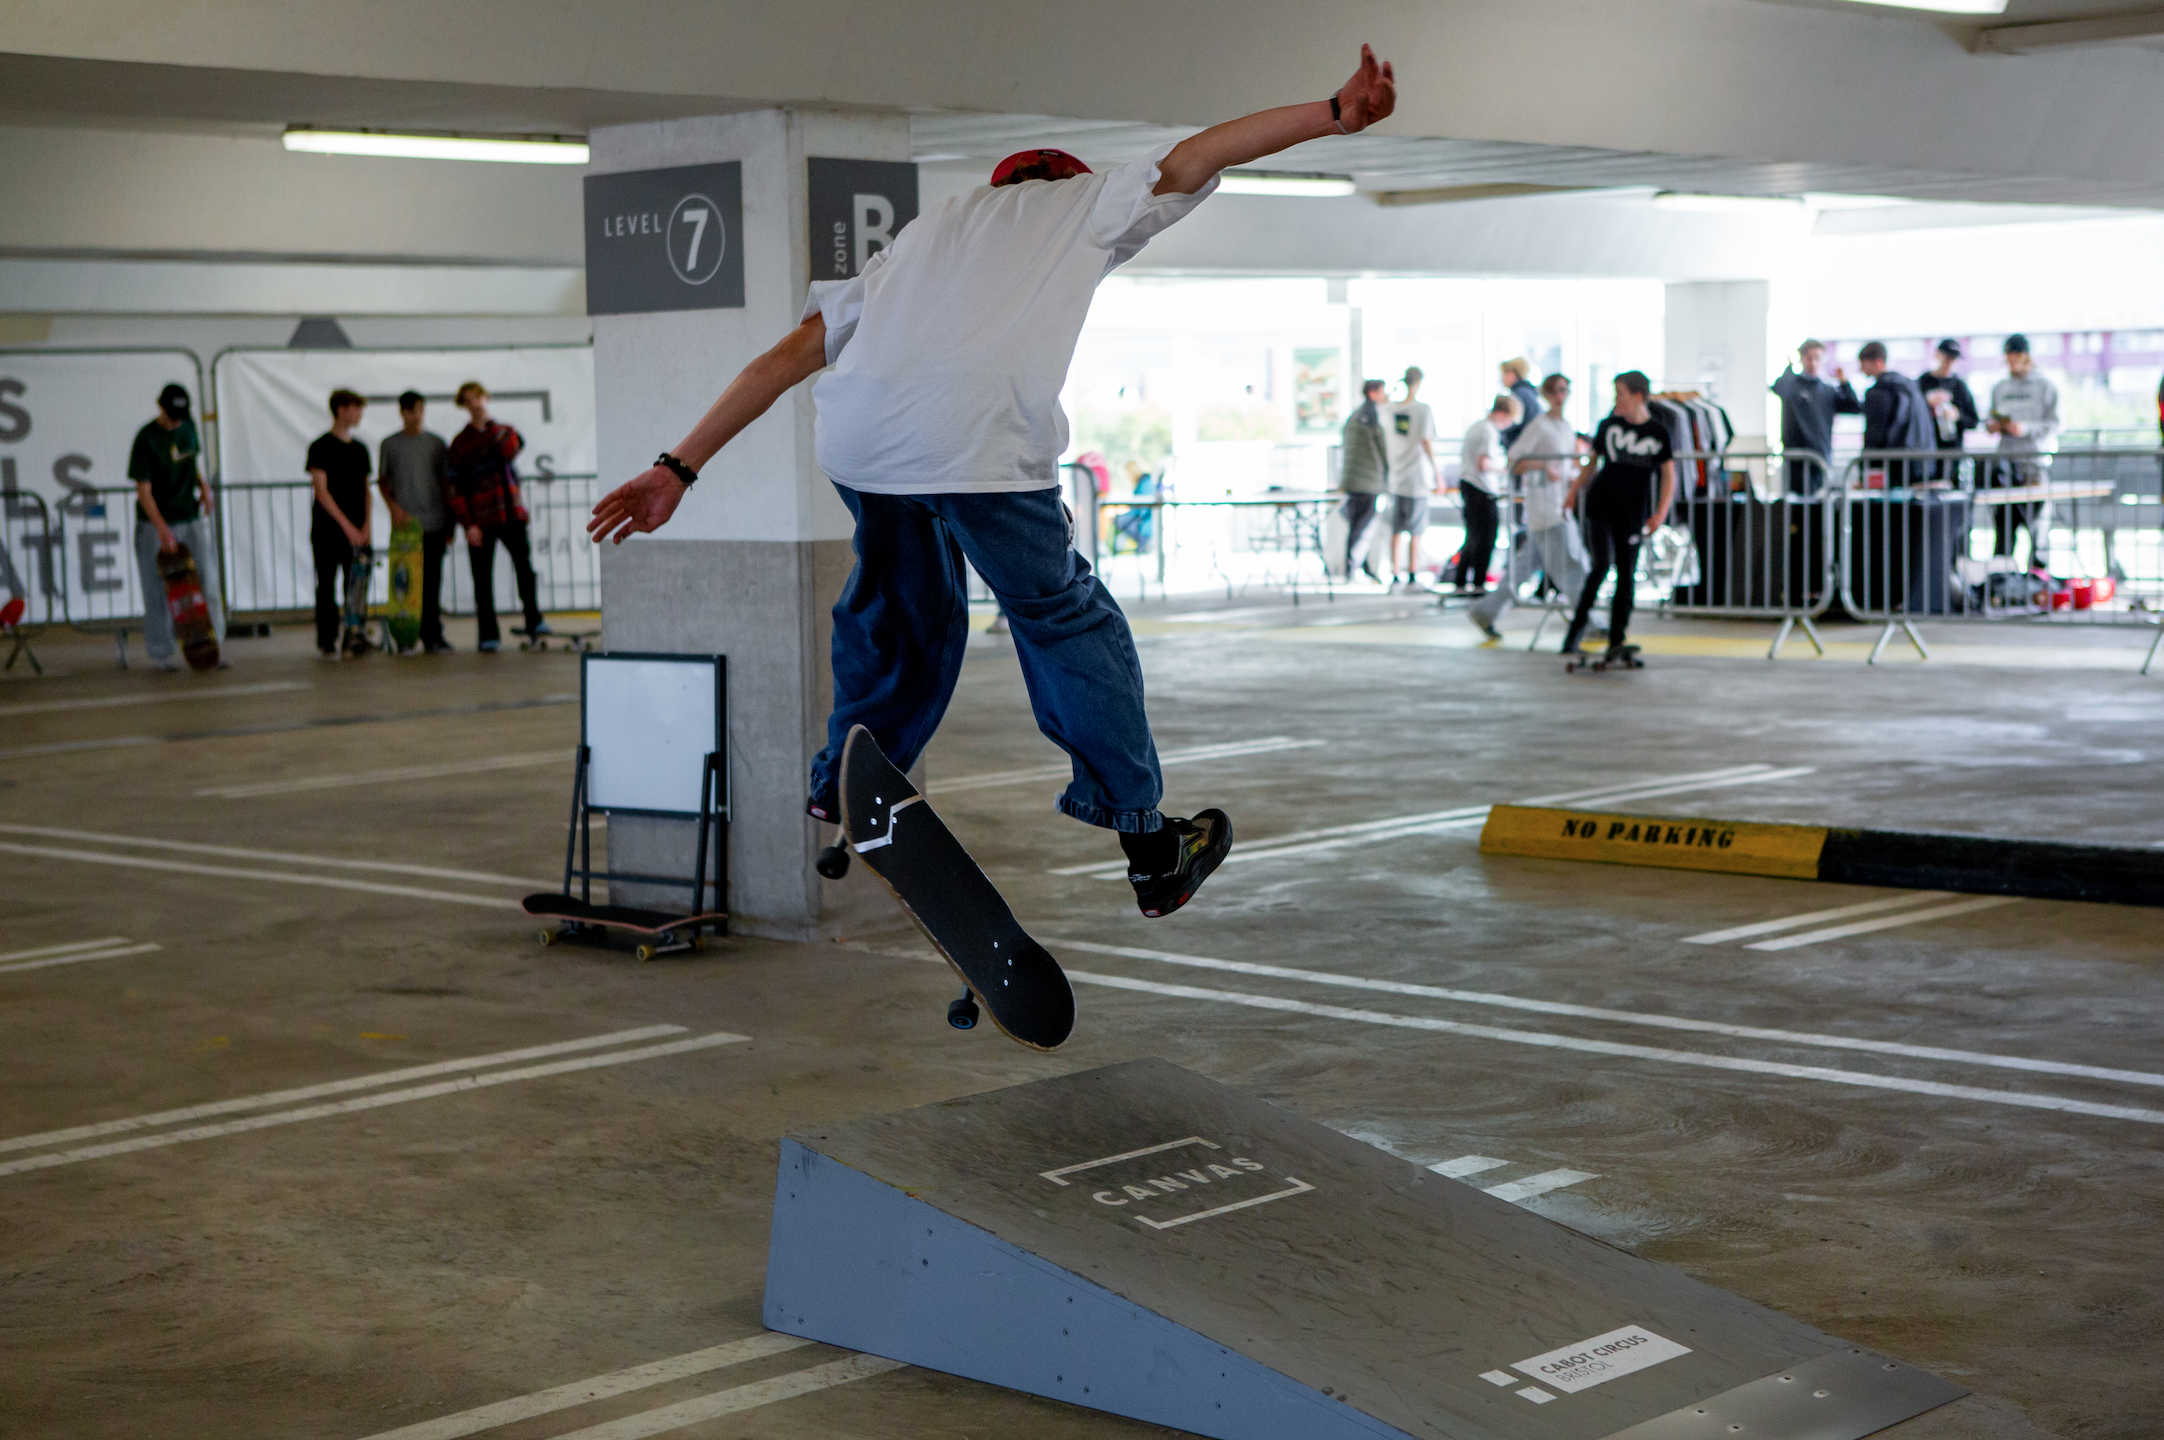 A skateboarder performing tricks at the Cabot Circus Skate Park in Bristol